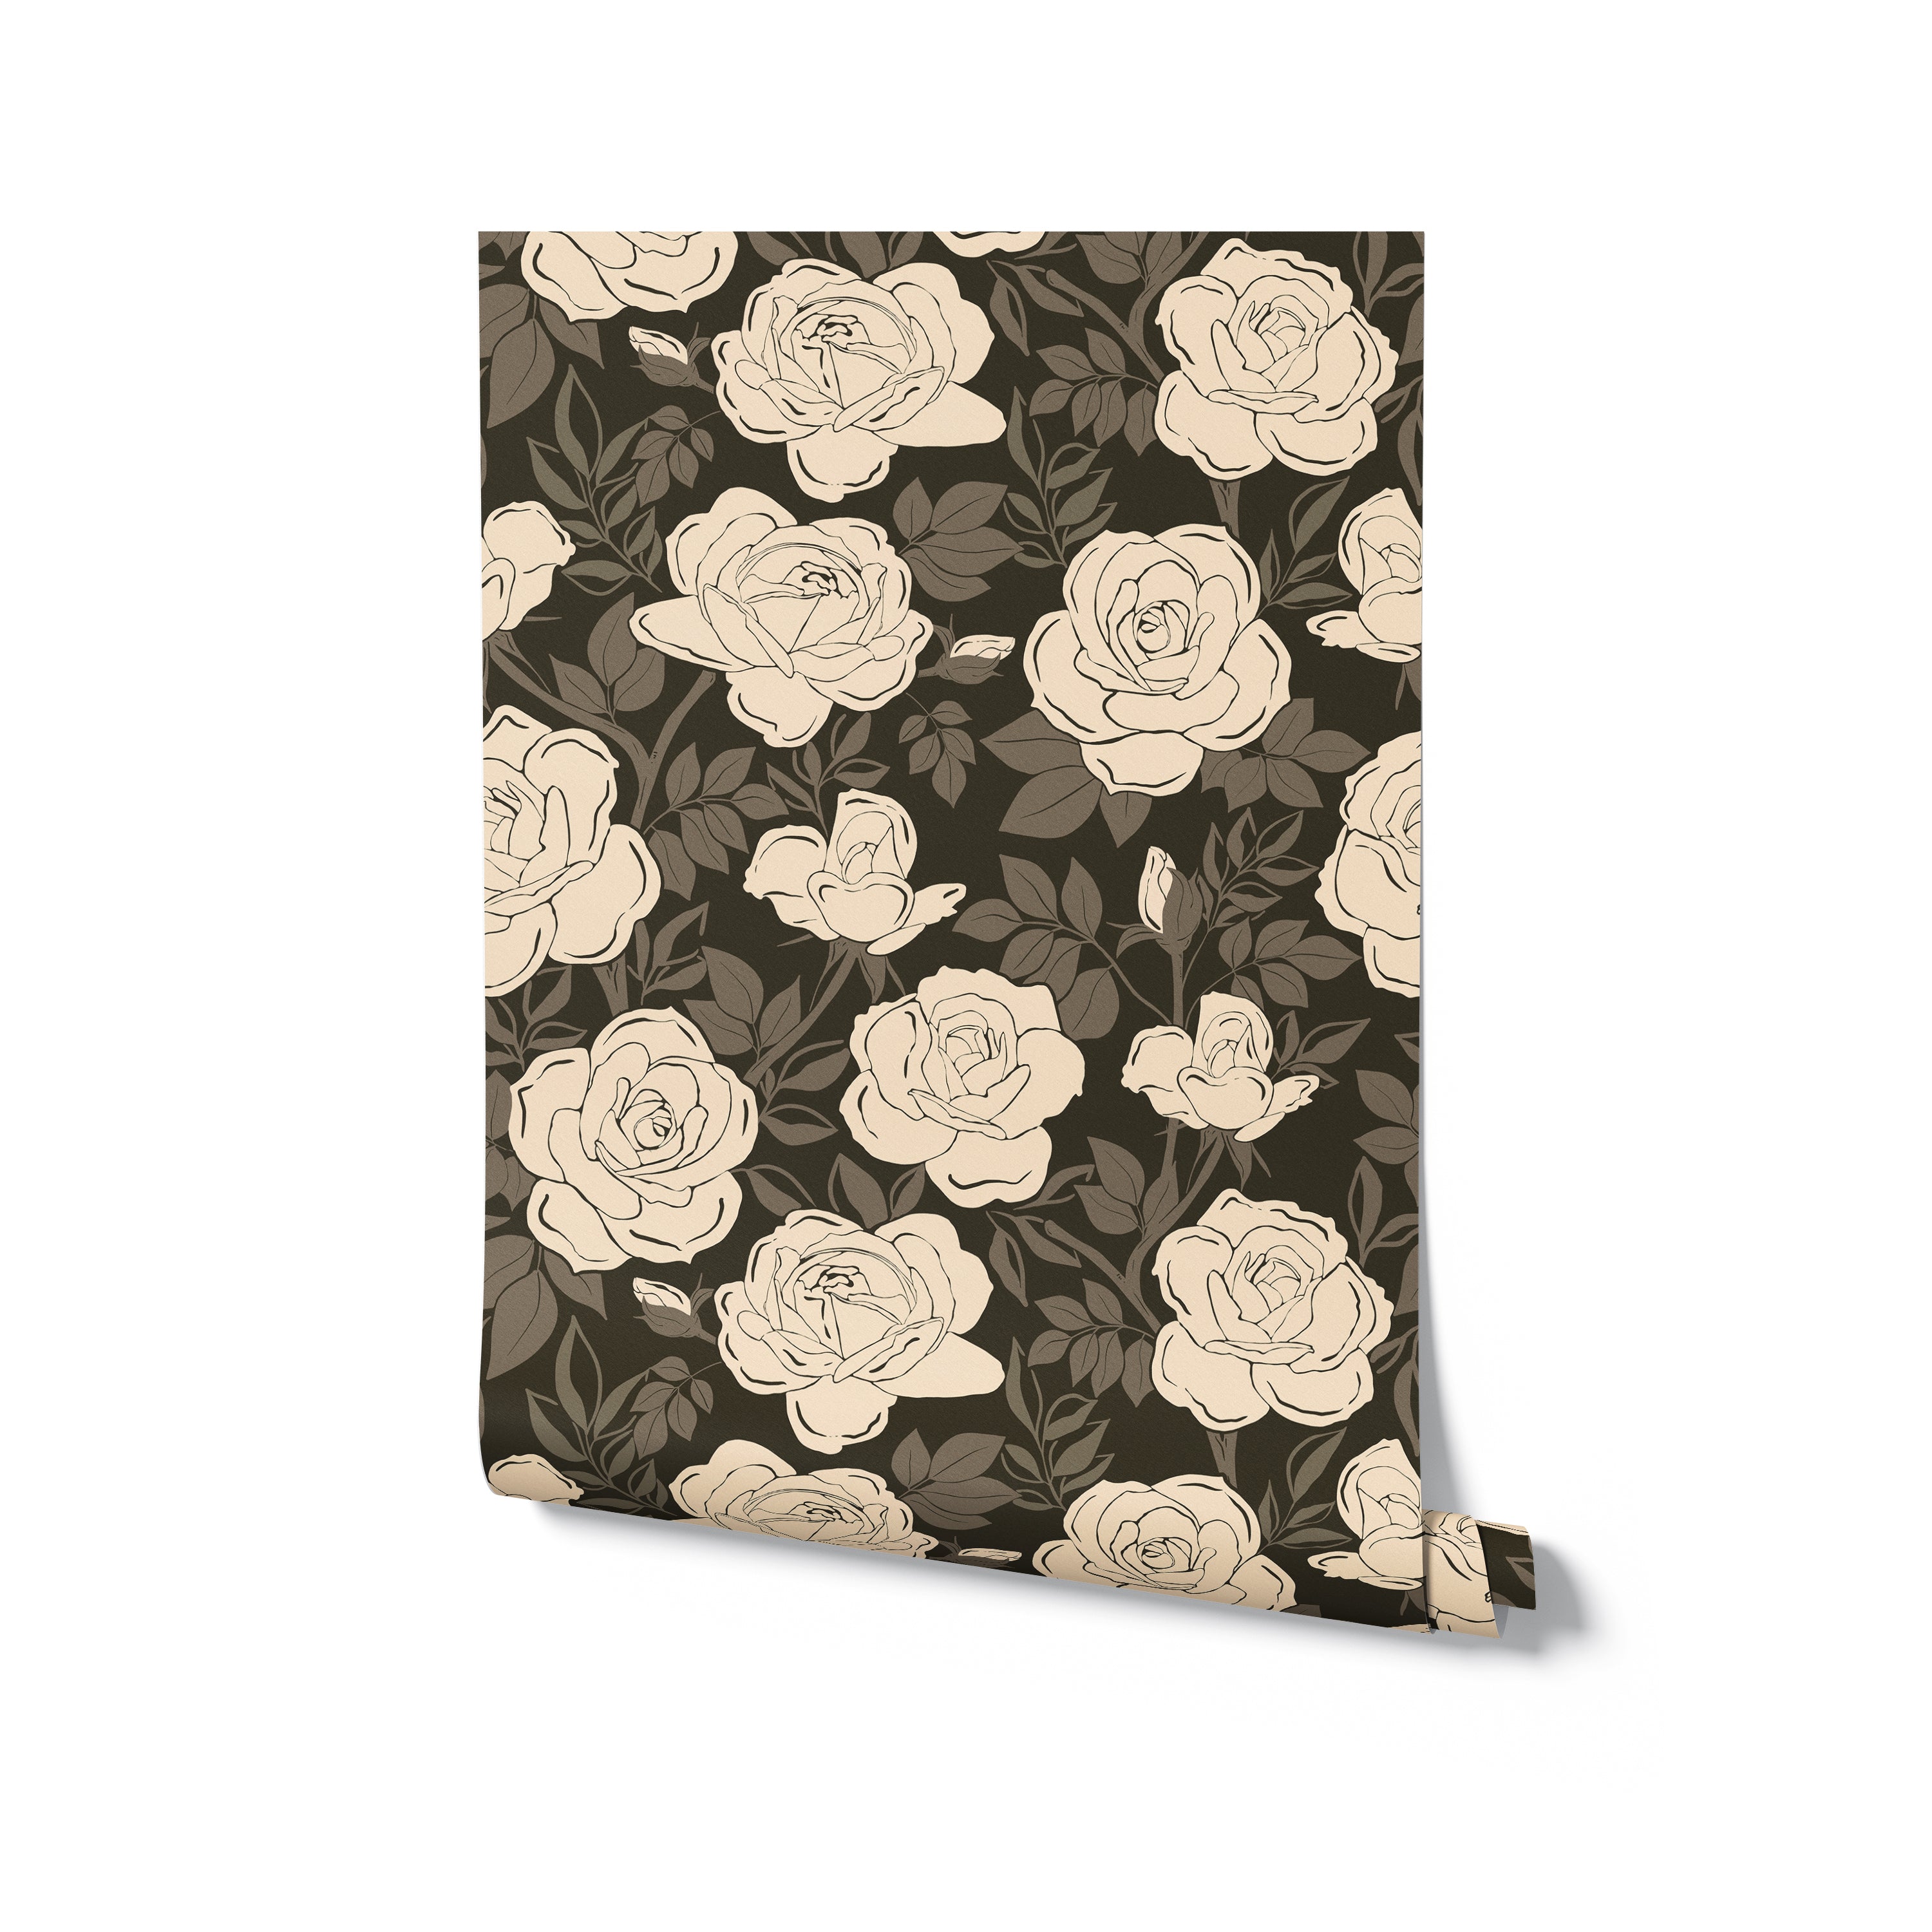 A roll of wallpaper with a repeating pattern of stylized cream roses and olive green leaves on a dark background, suggesting an elegant and contemporary design suitable for various interior decor styles.